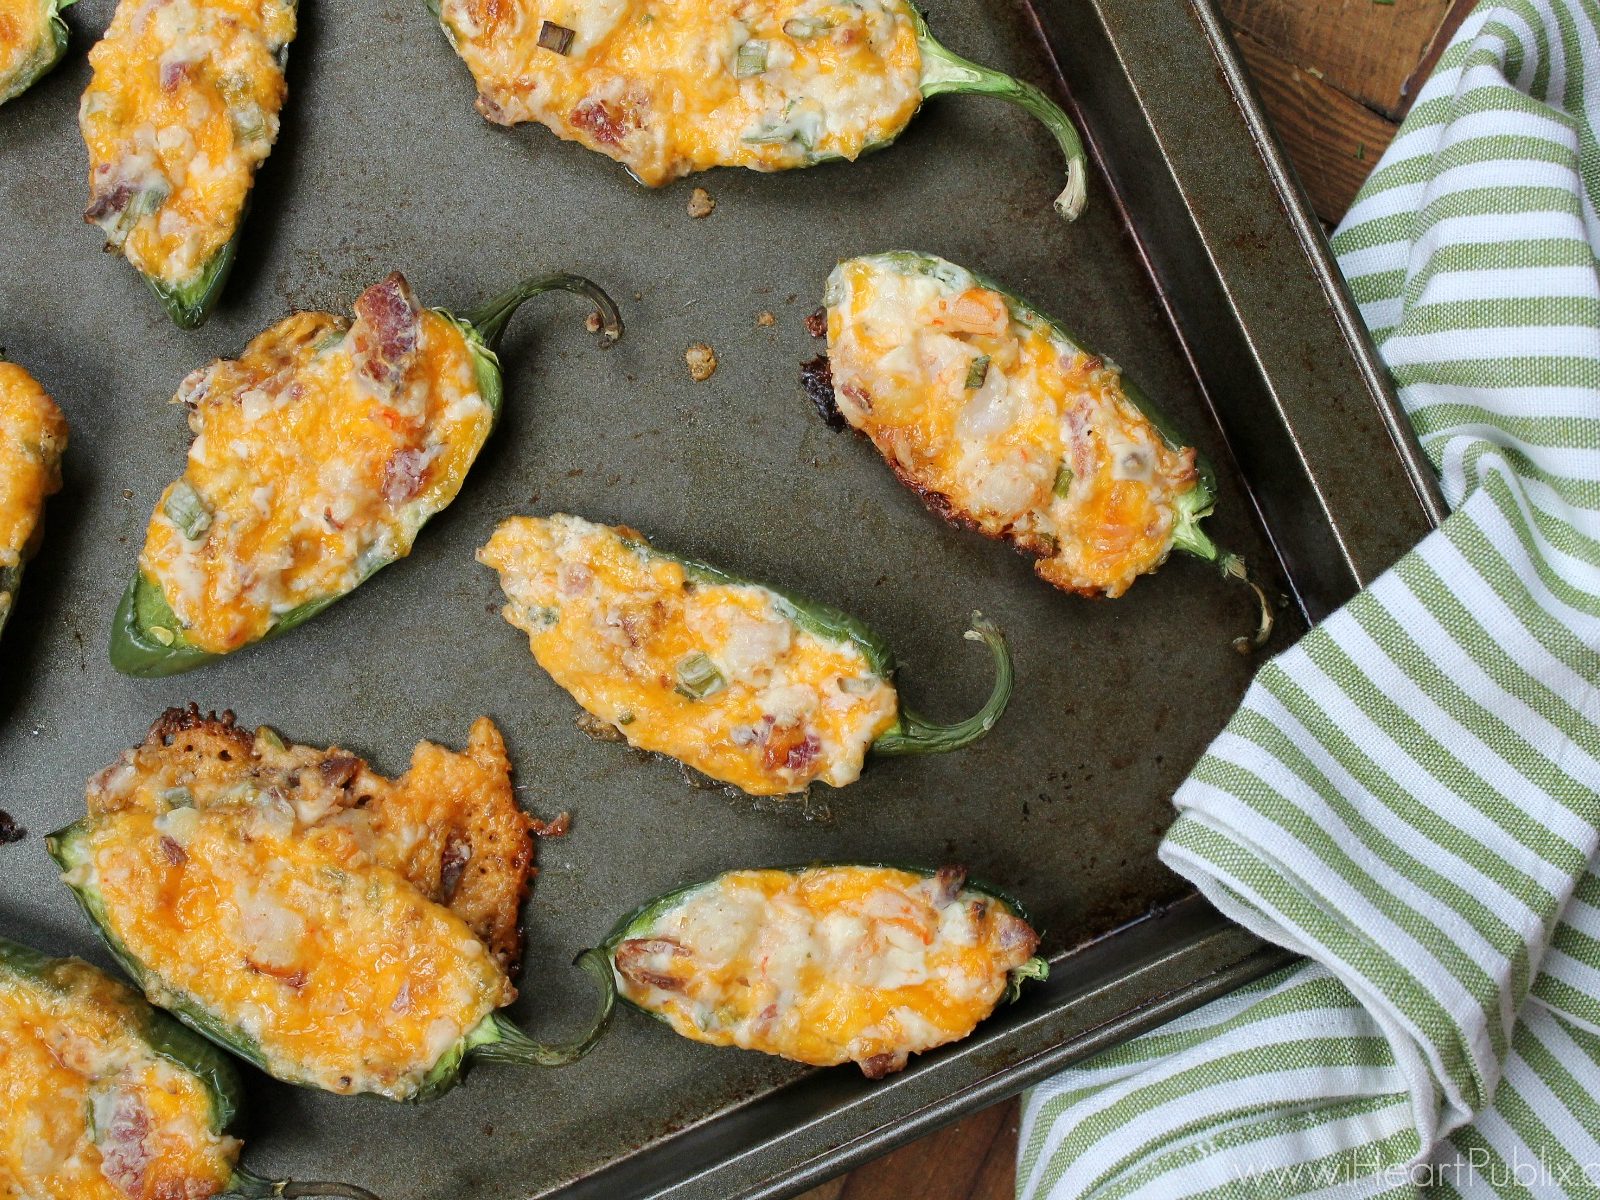 Bacon, Ranch & Shrimp Stuffed Jalapeños – Pick Up Big Savings On Arla Cream Cheese For This Recipe With The New Coupon!